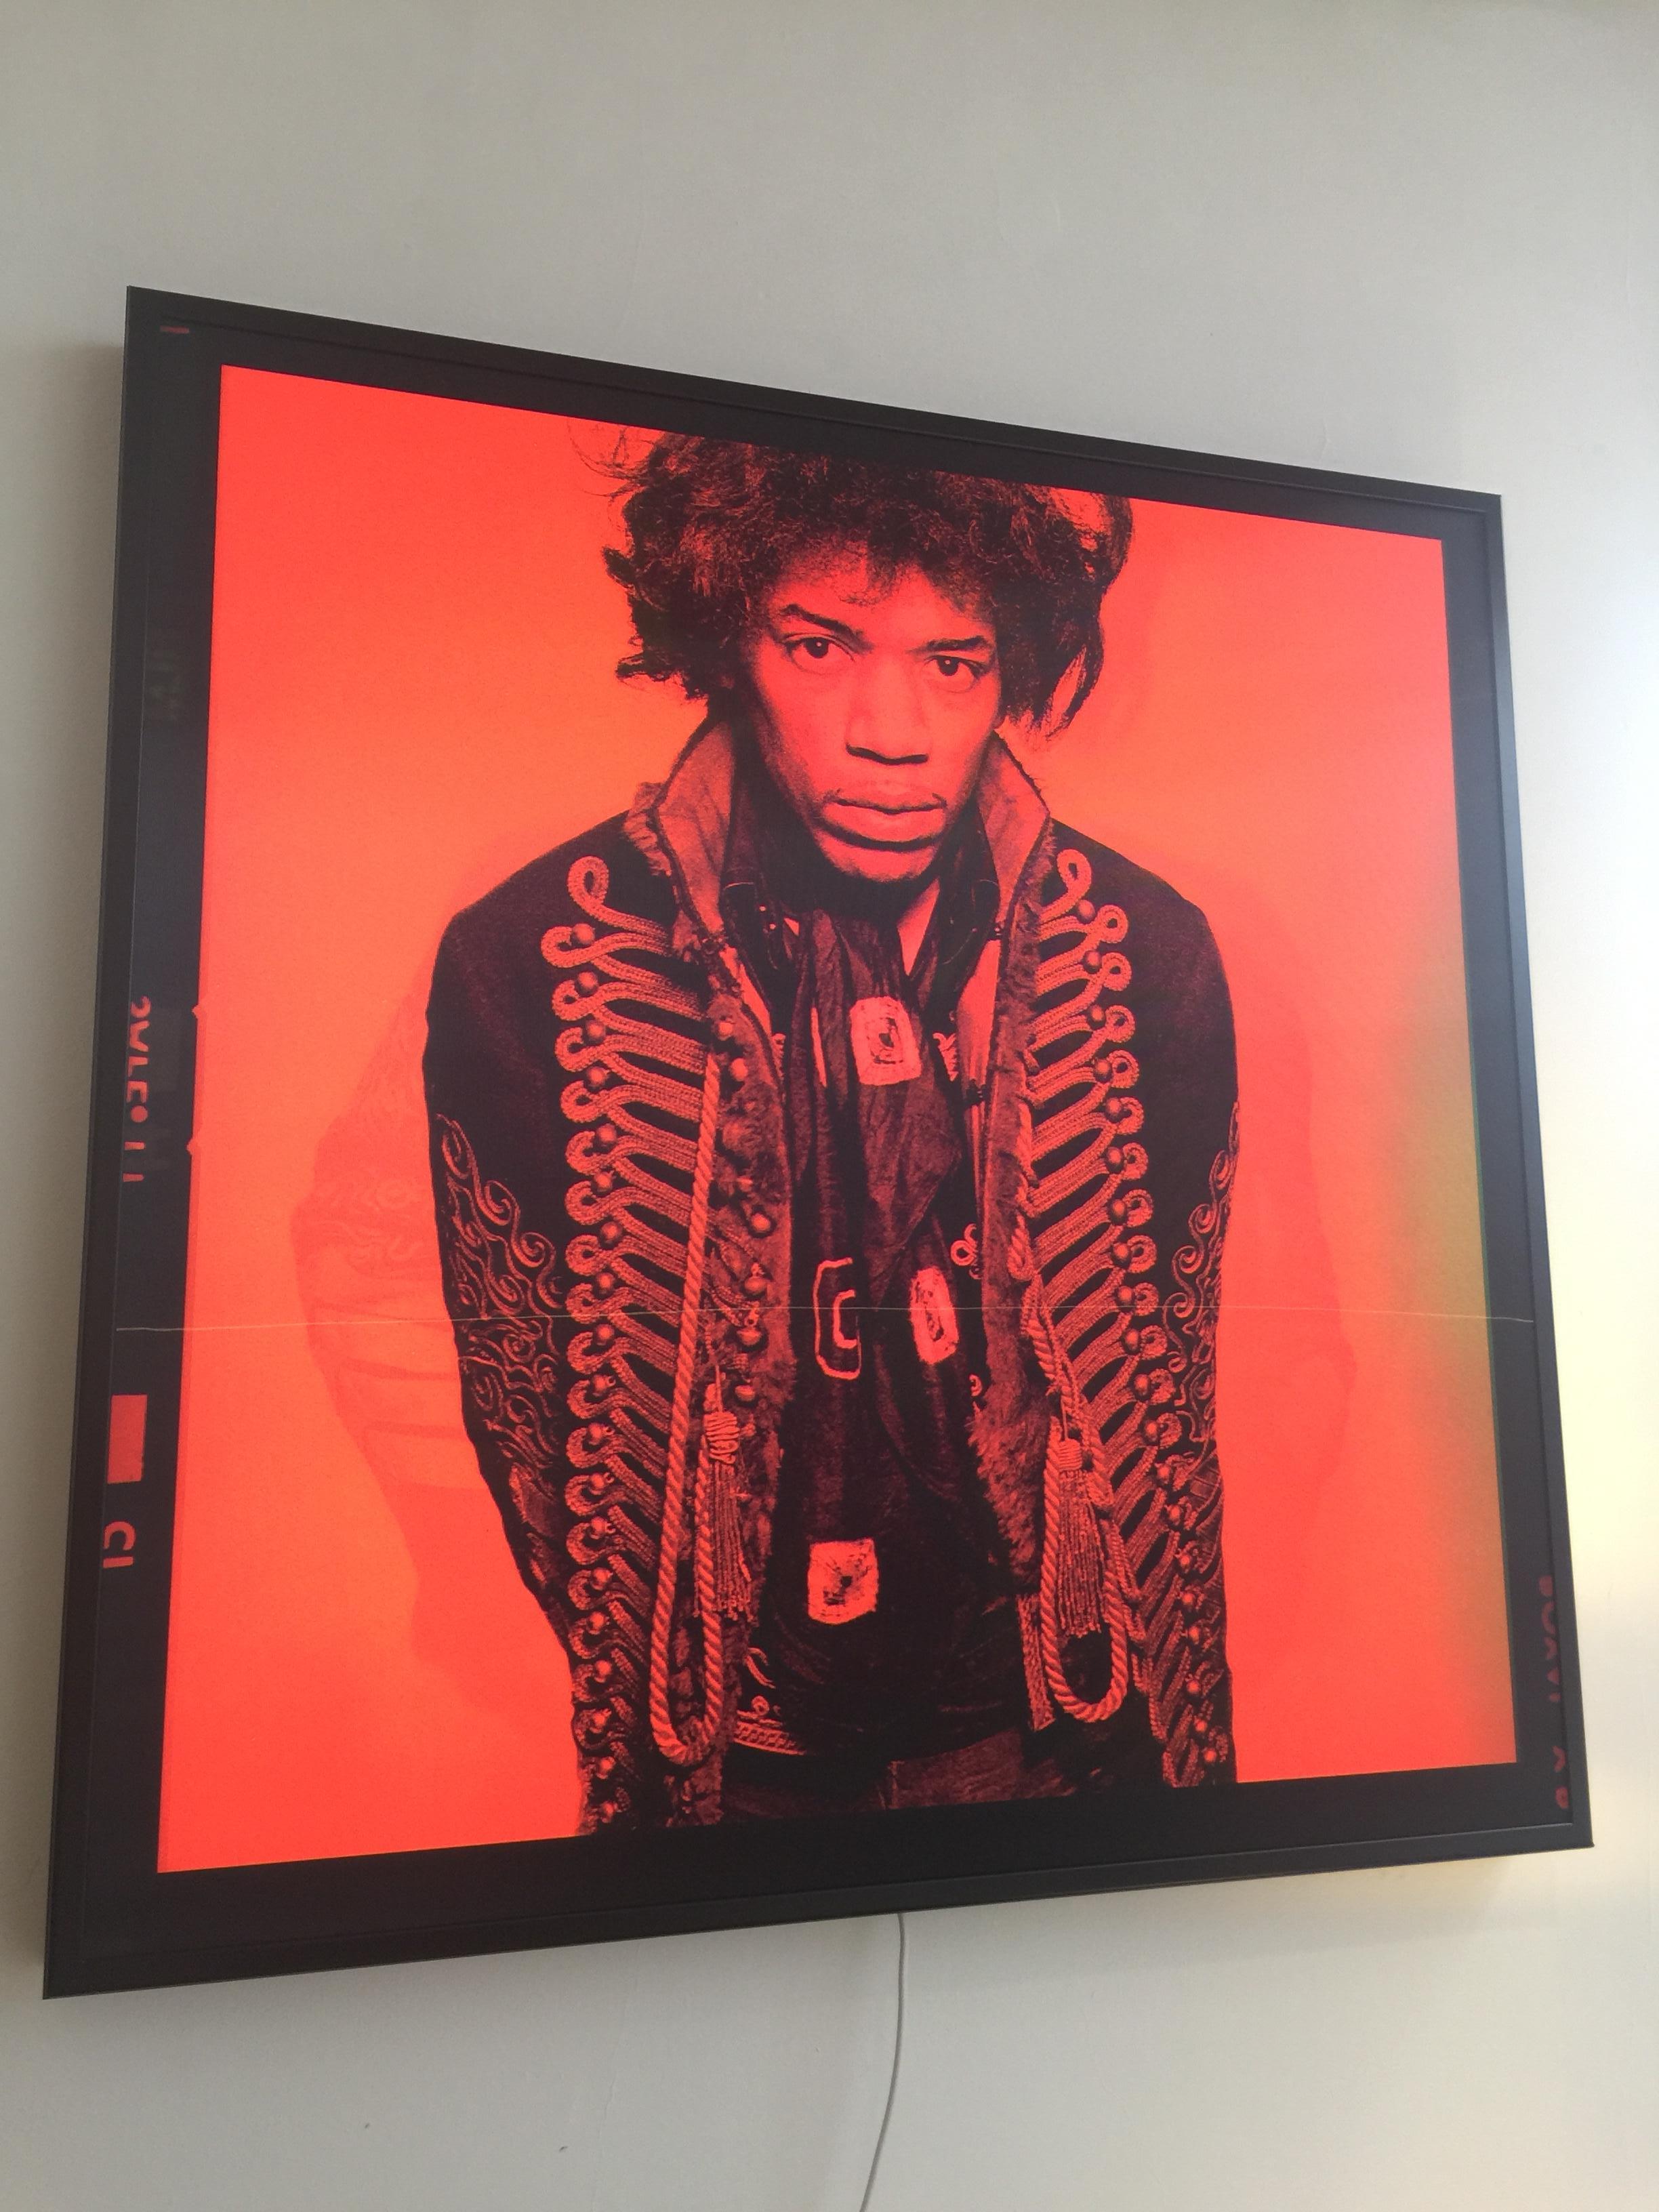 Contemporary 'Jimi Hendrix Crosstown Traffic Lights' LED Lightbox by Gered Mankowitz, 2020